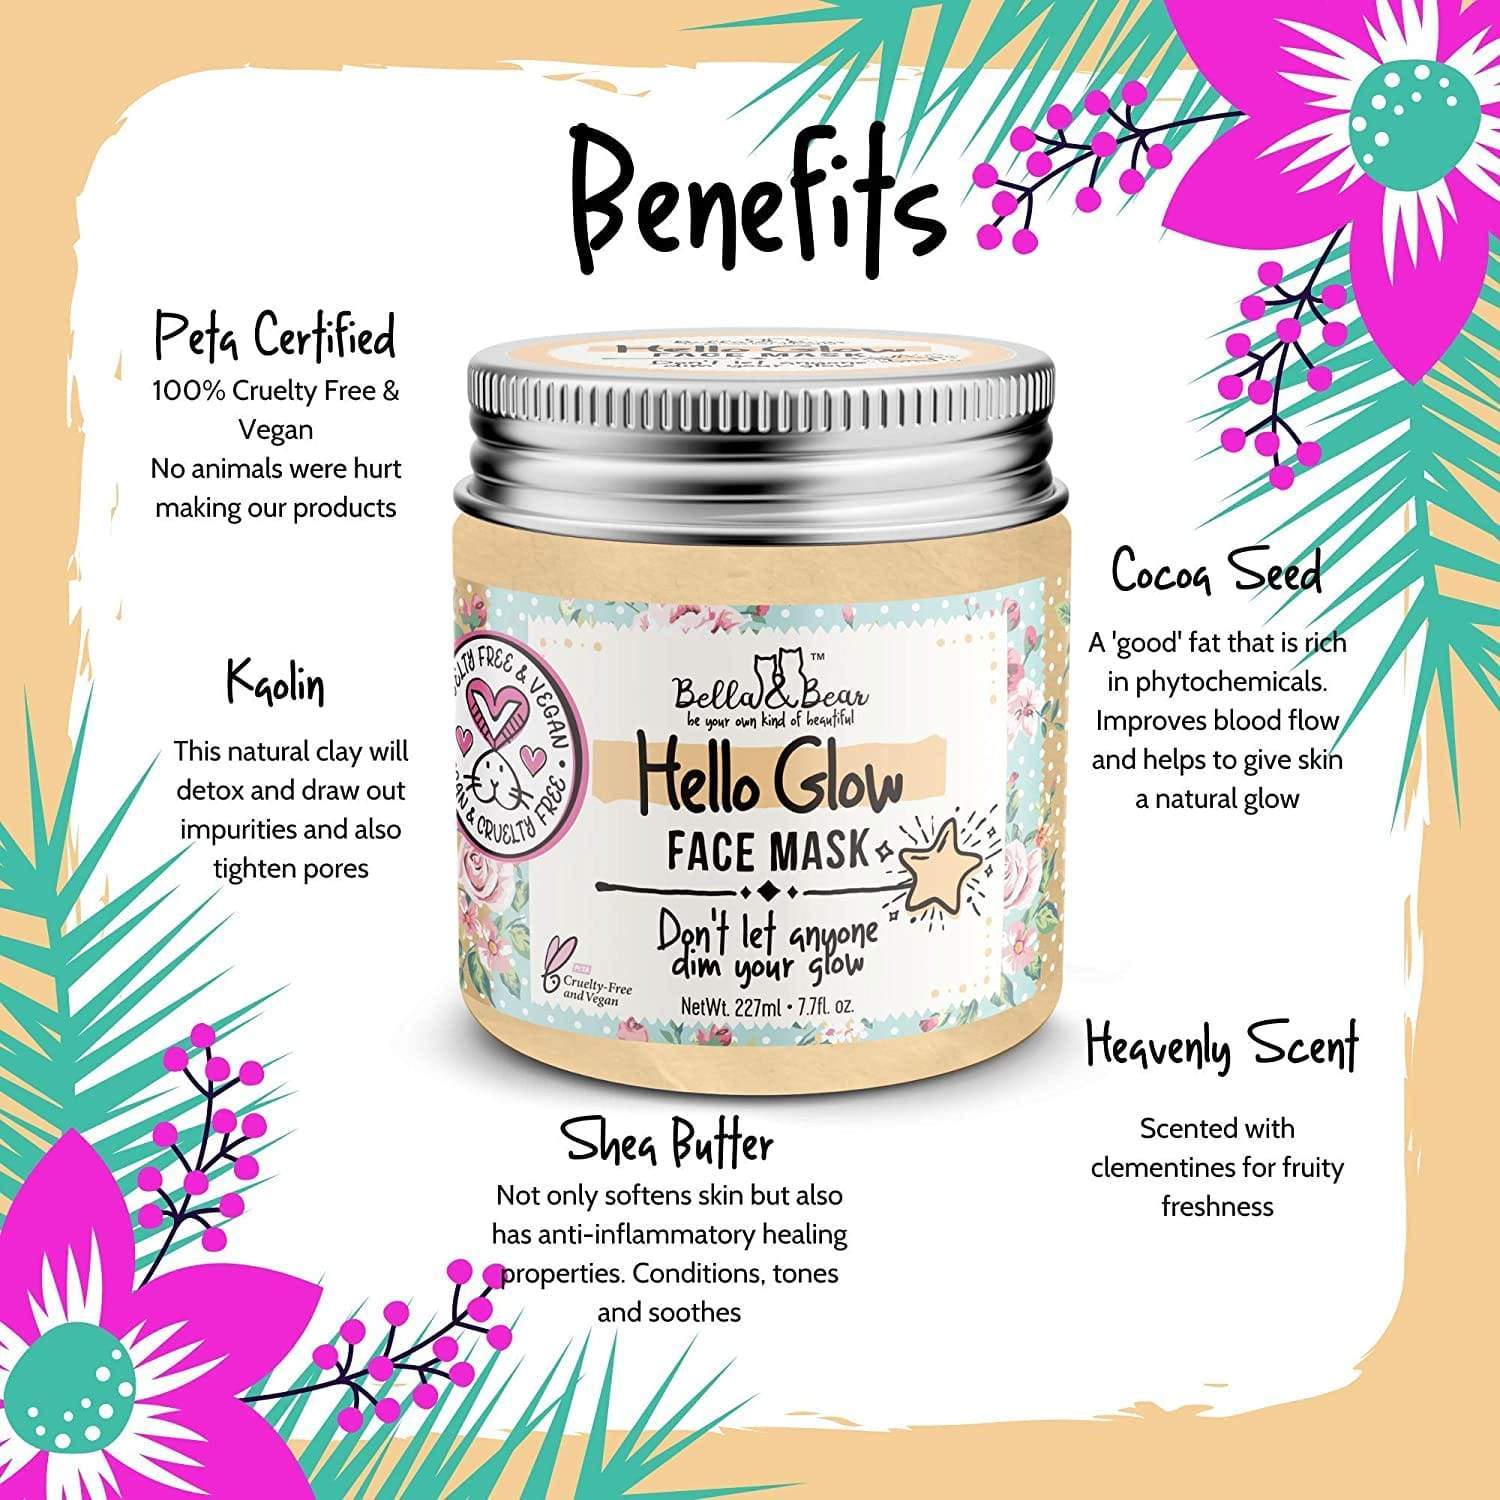 Bella & Bear Hello Glow Face Mask with skin brightening ingredients for younger looking skin 200ml